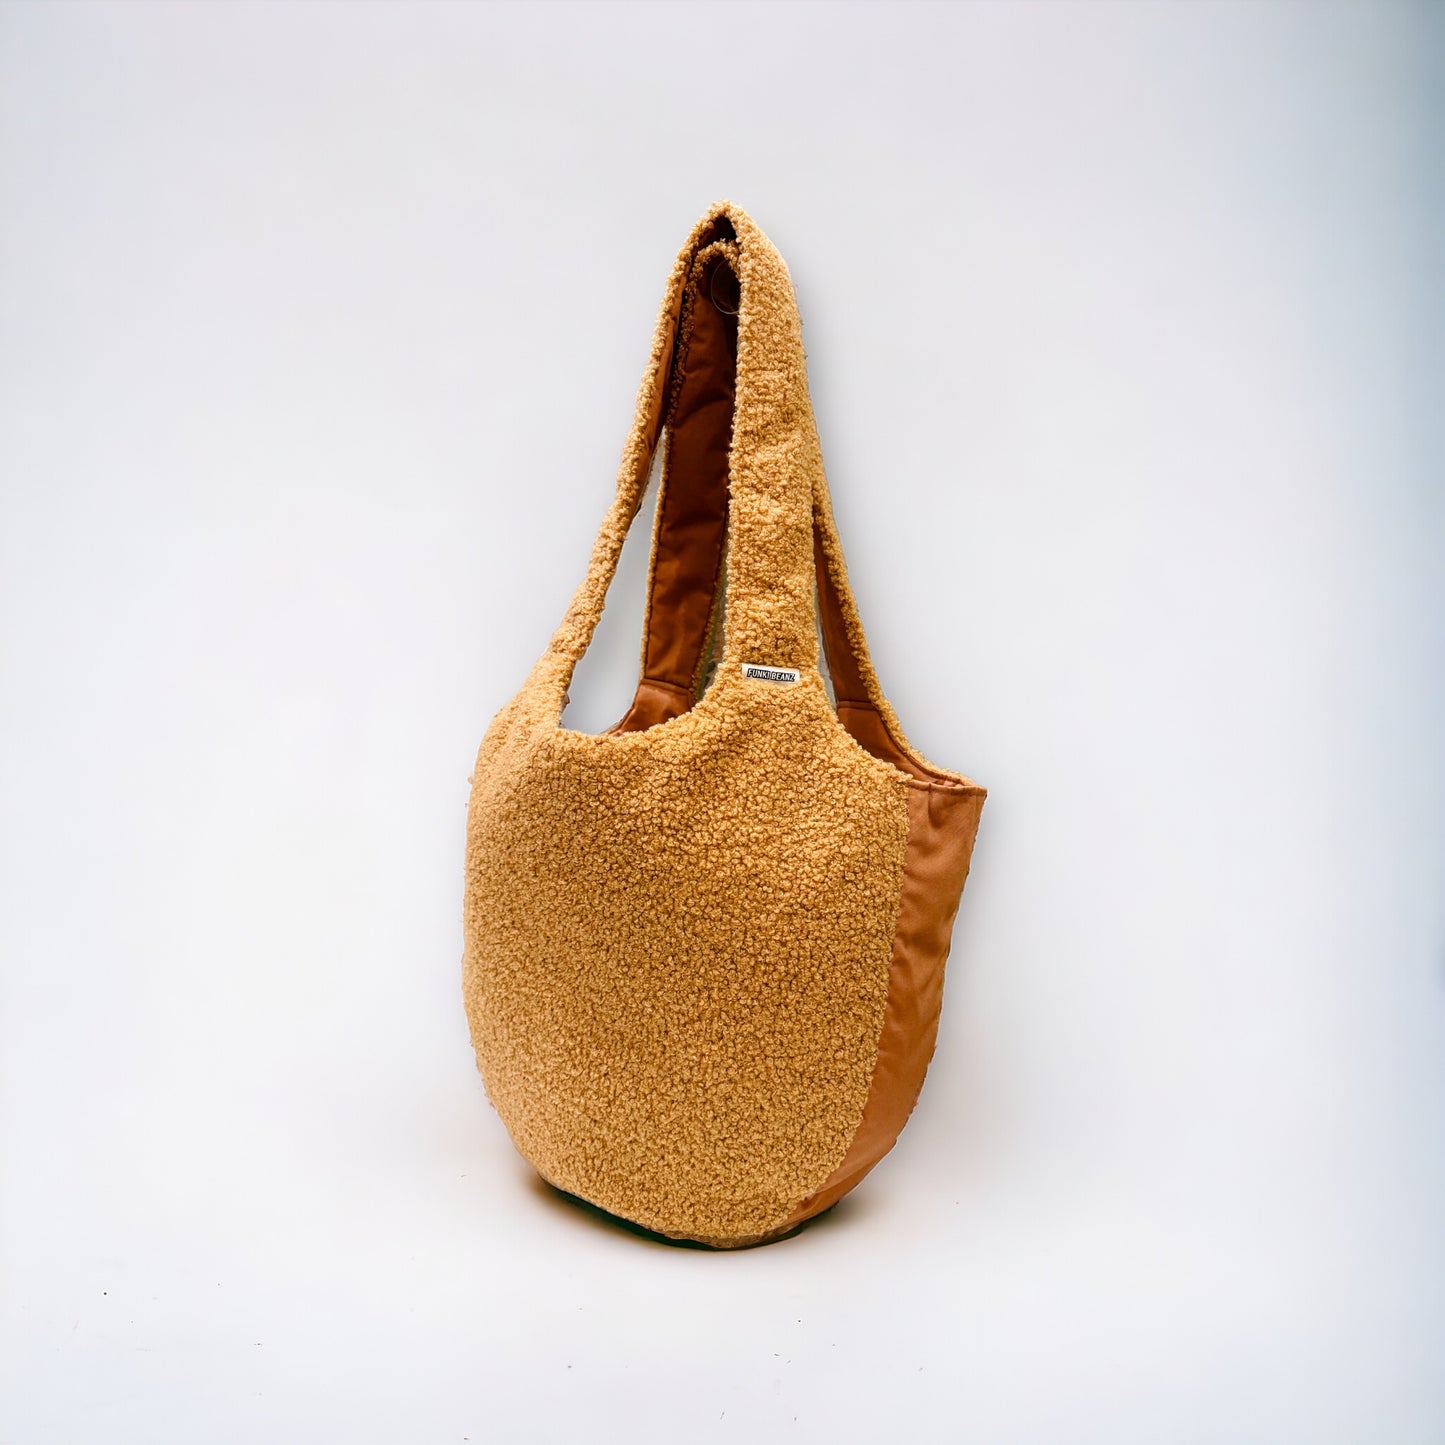 FunkiBeanz Winter Collection #1 - Camel Teddy Tote